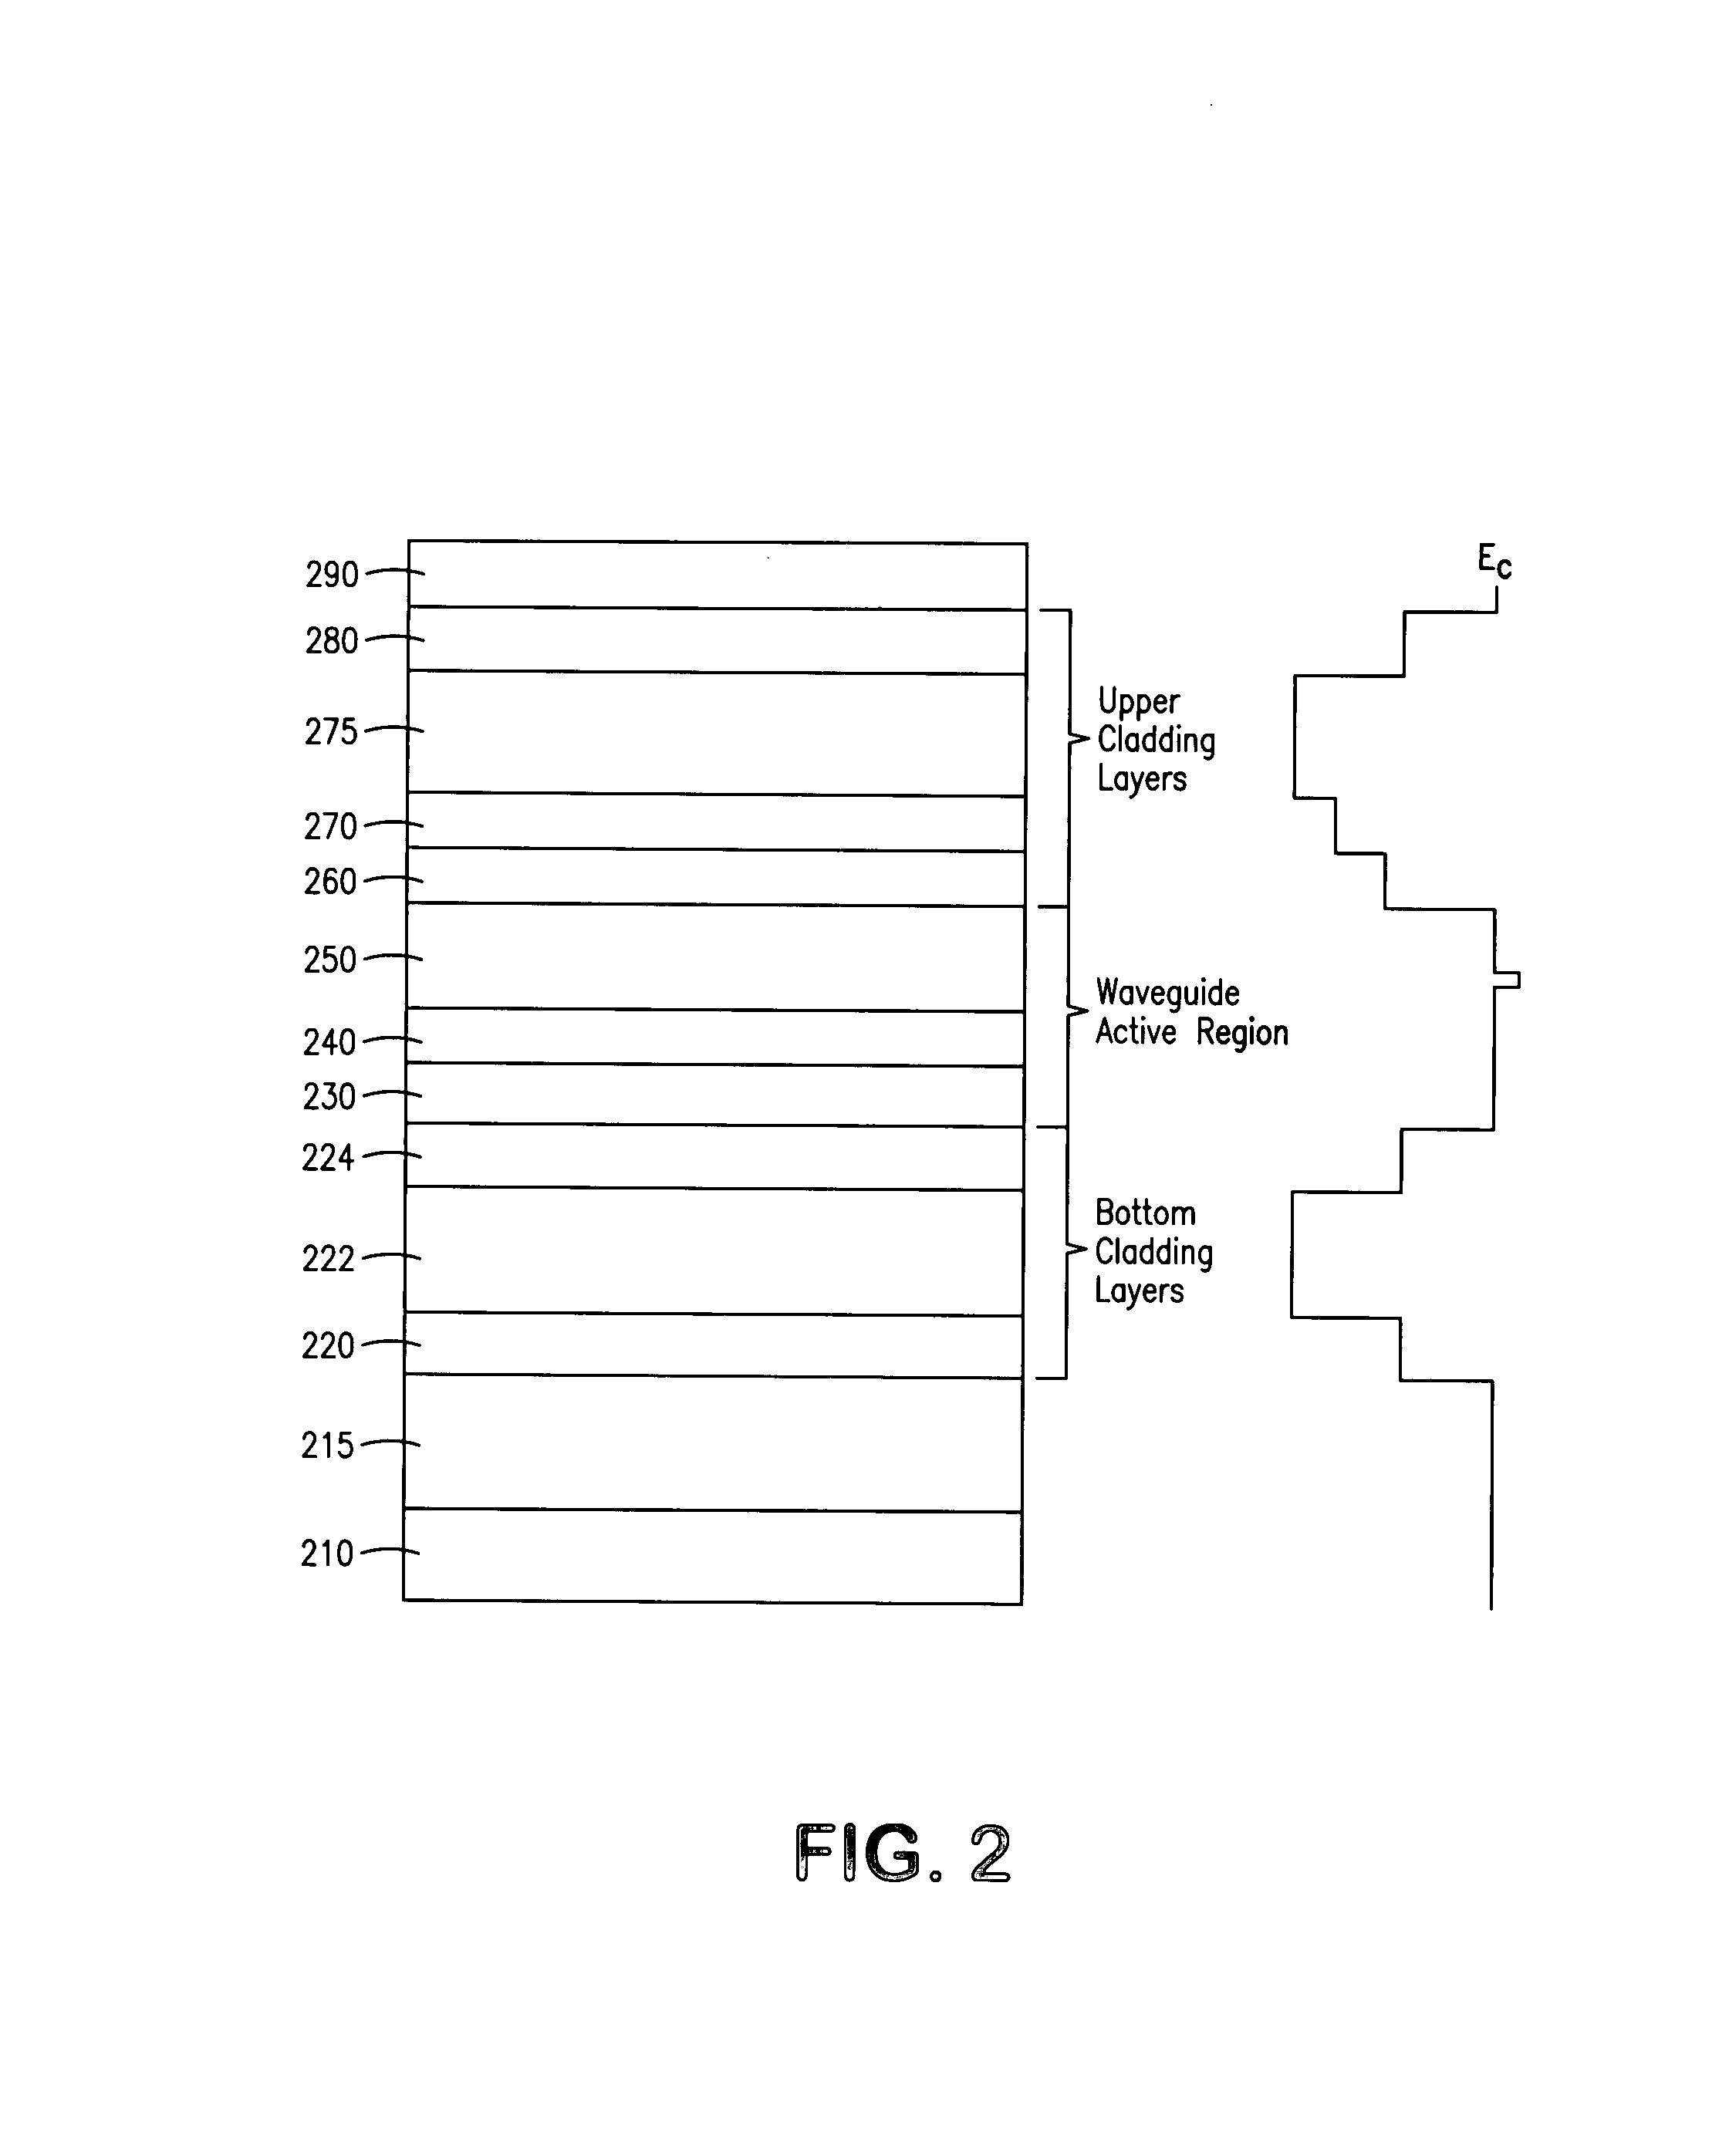 Semiconductor laser devices and methods